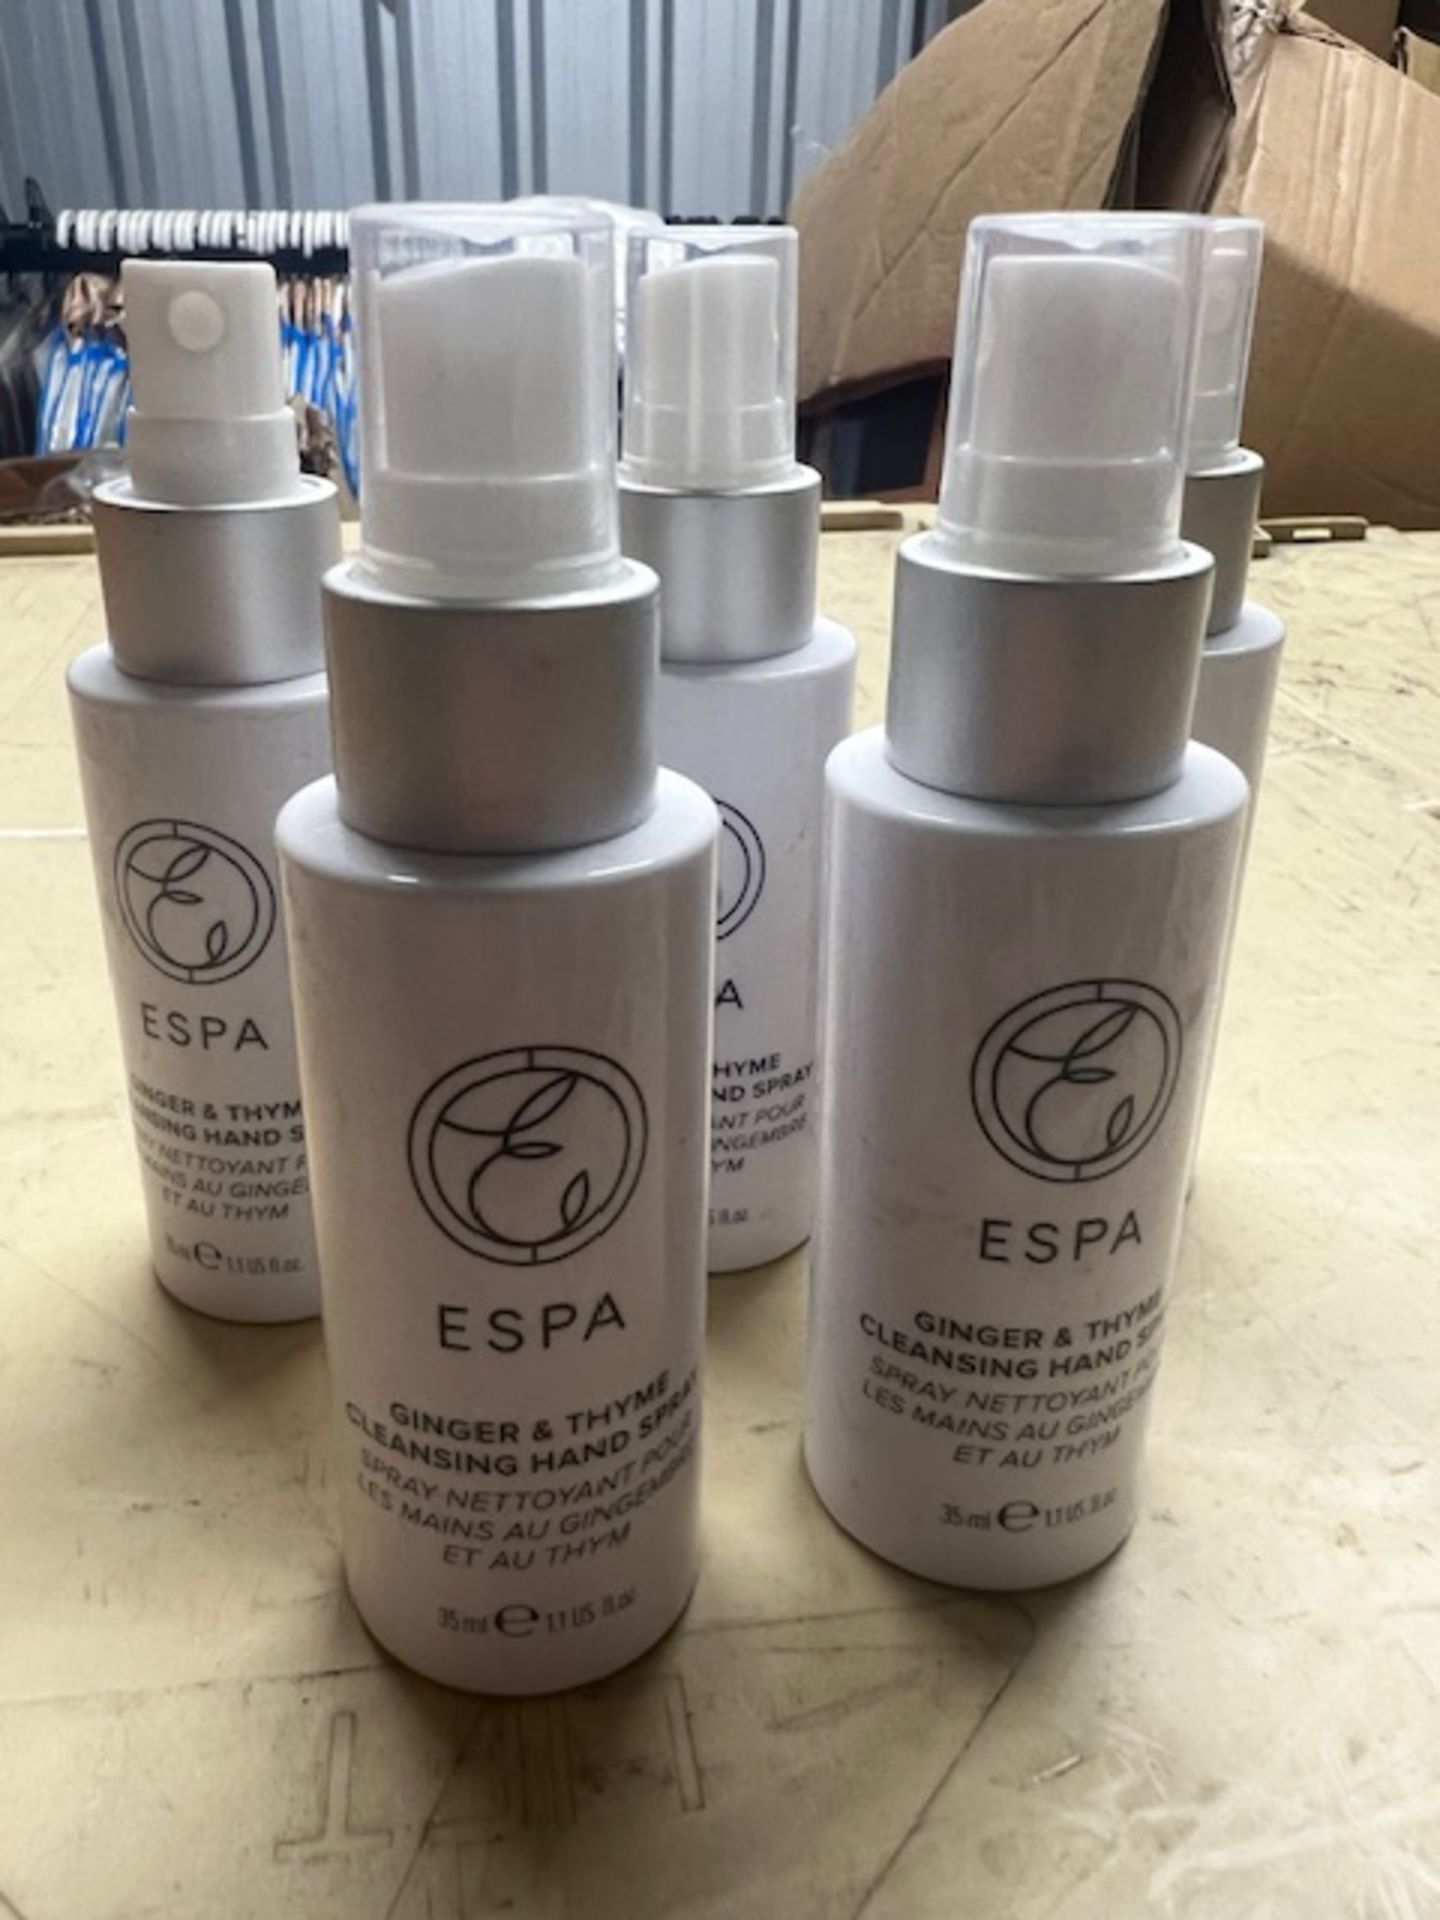 5 ESPA Cleansing Hand Products Ginger and Thyme - Bild 3 aus 3